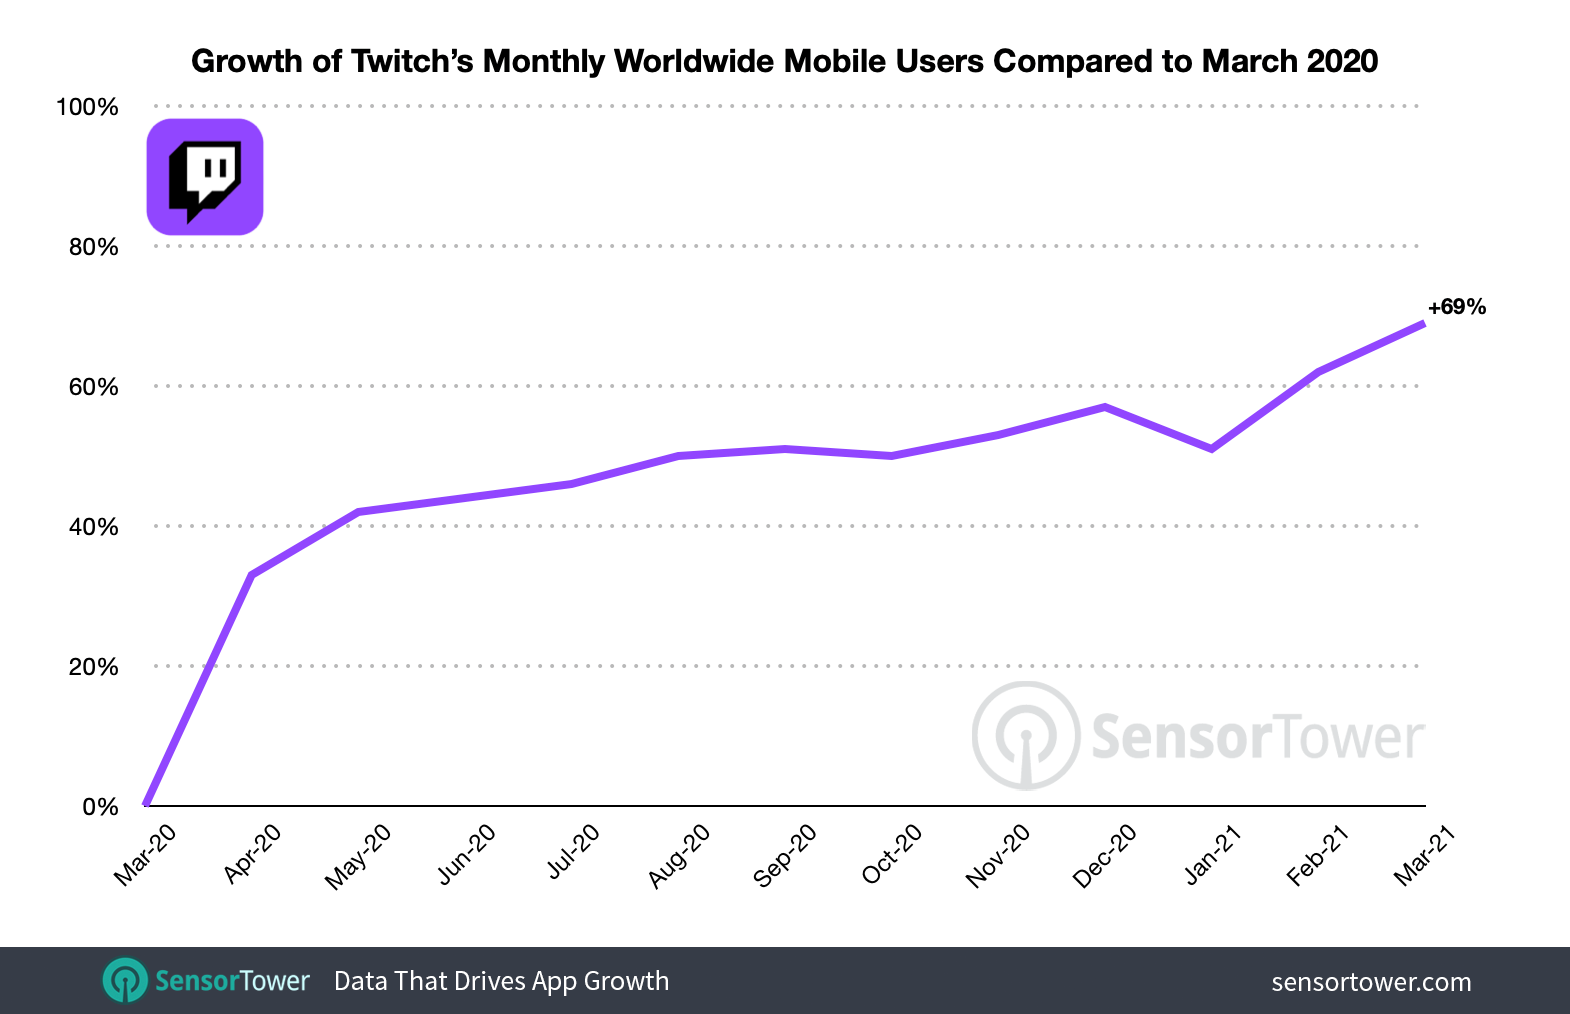 Twitch's global monthly active users in March 2021 were up 69 percent compared to March 2020.